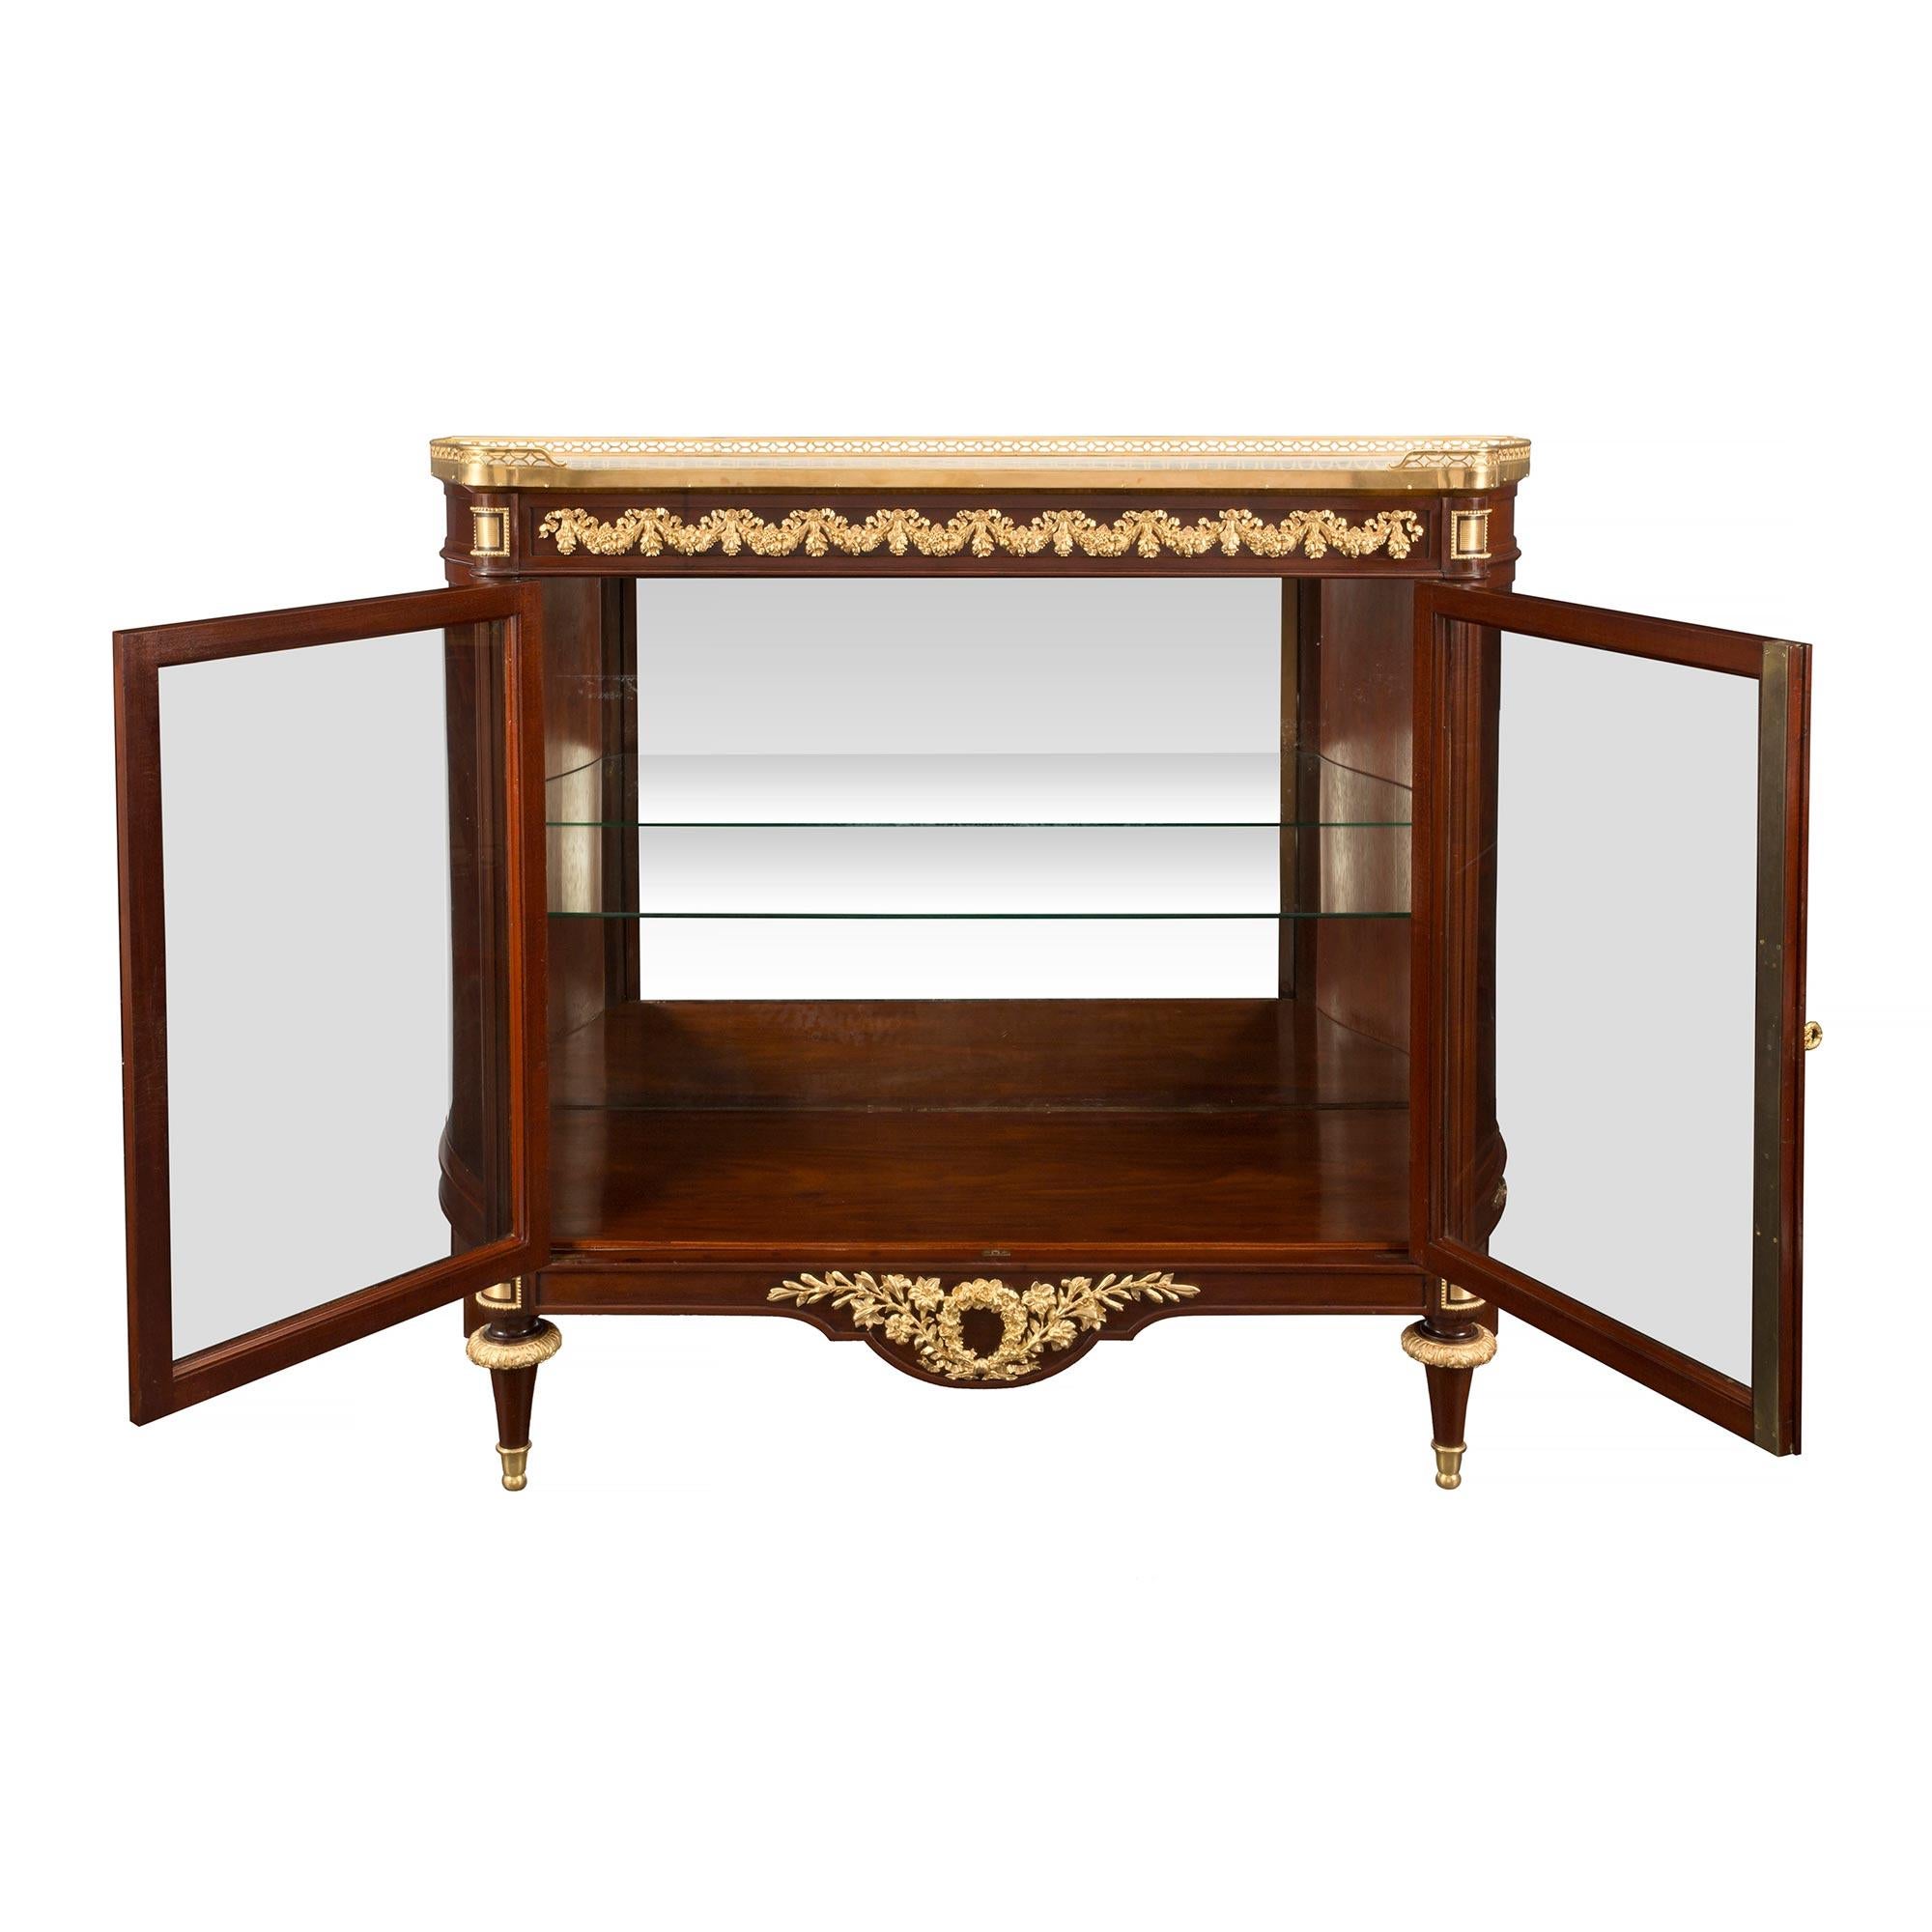 French 19th Century Louis XVI St. Belle Époque Period Cabinet Vitrine In Good Condition For Sale In West Palm Beach, FL